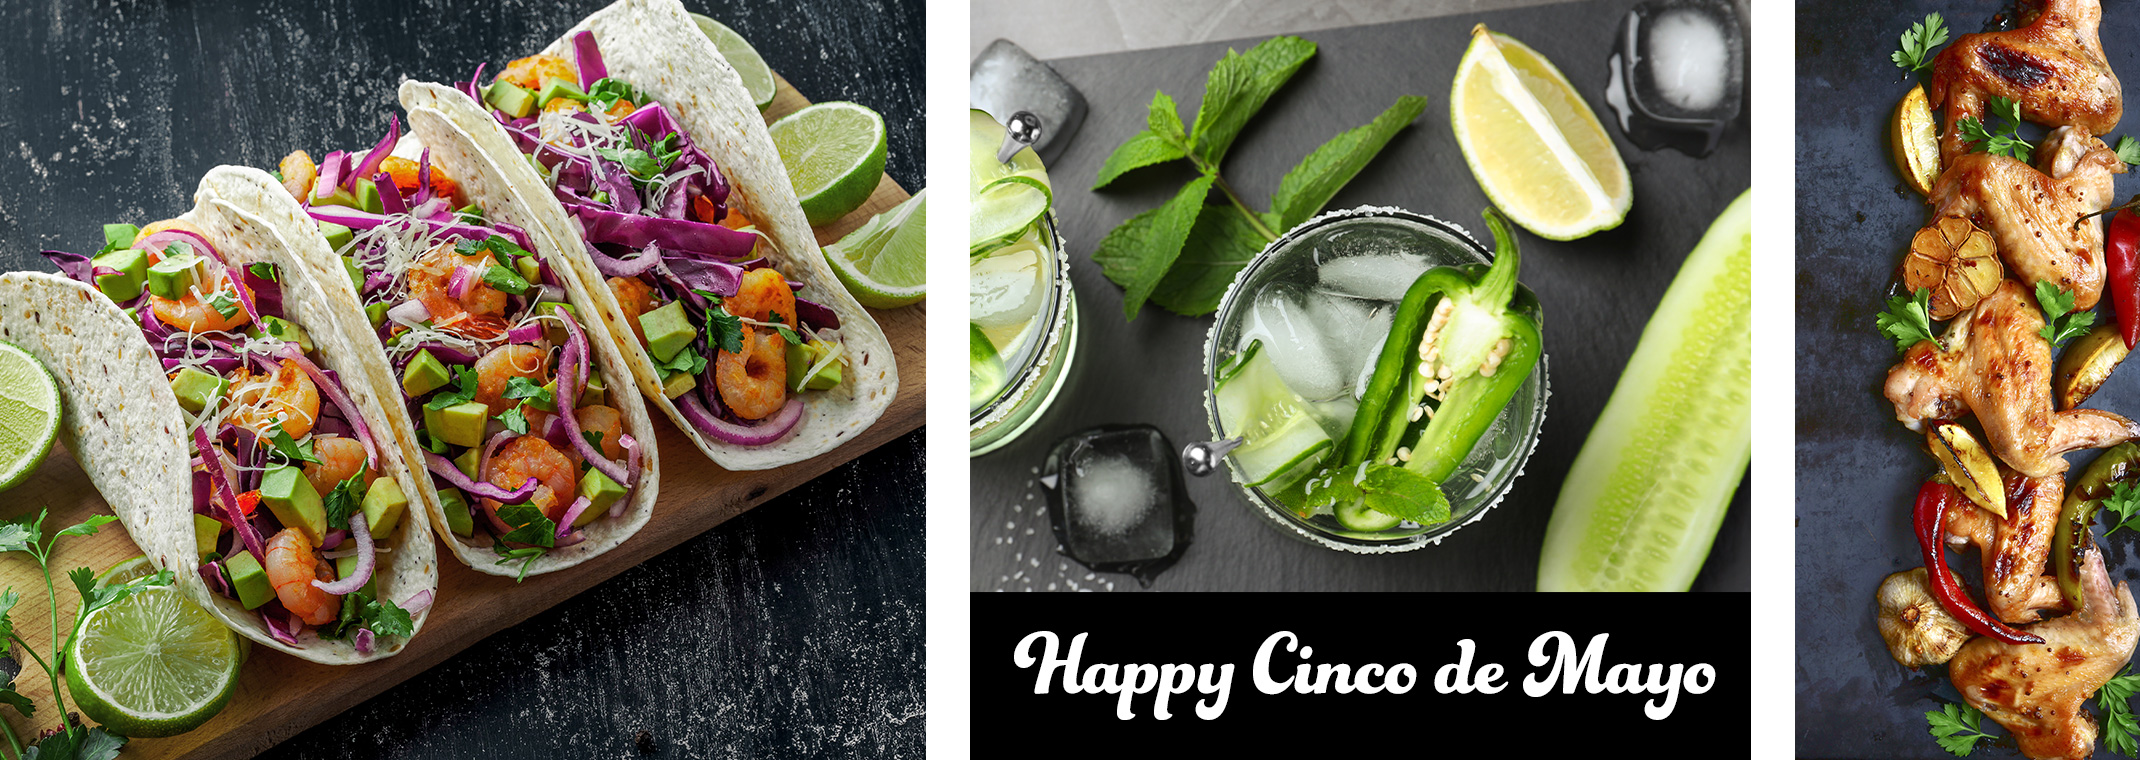 Happy Cinco de Mayo: Cilantro Lime Shrimp Tacos, a Cucumber Jalapeño Margarita, and Tequila Lime Chicken Wings.